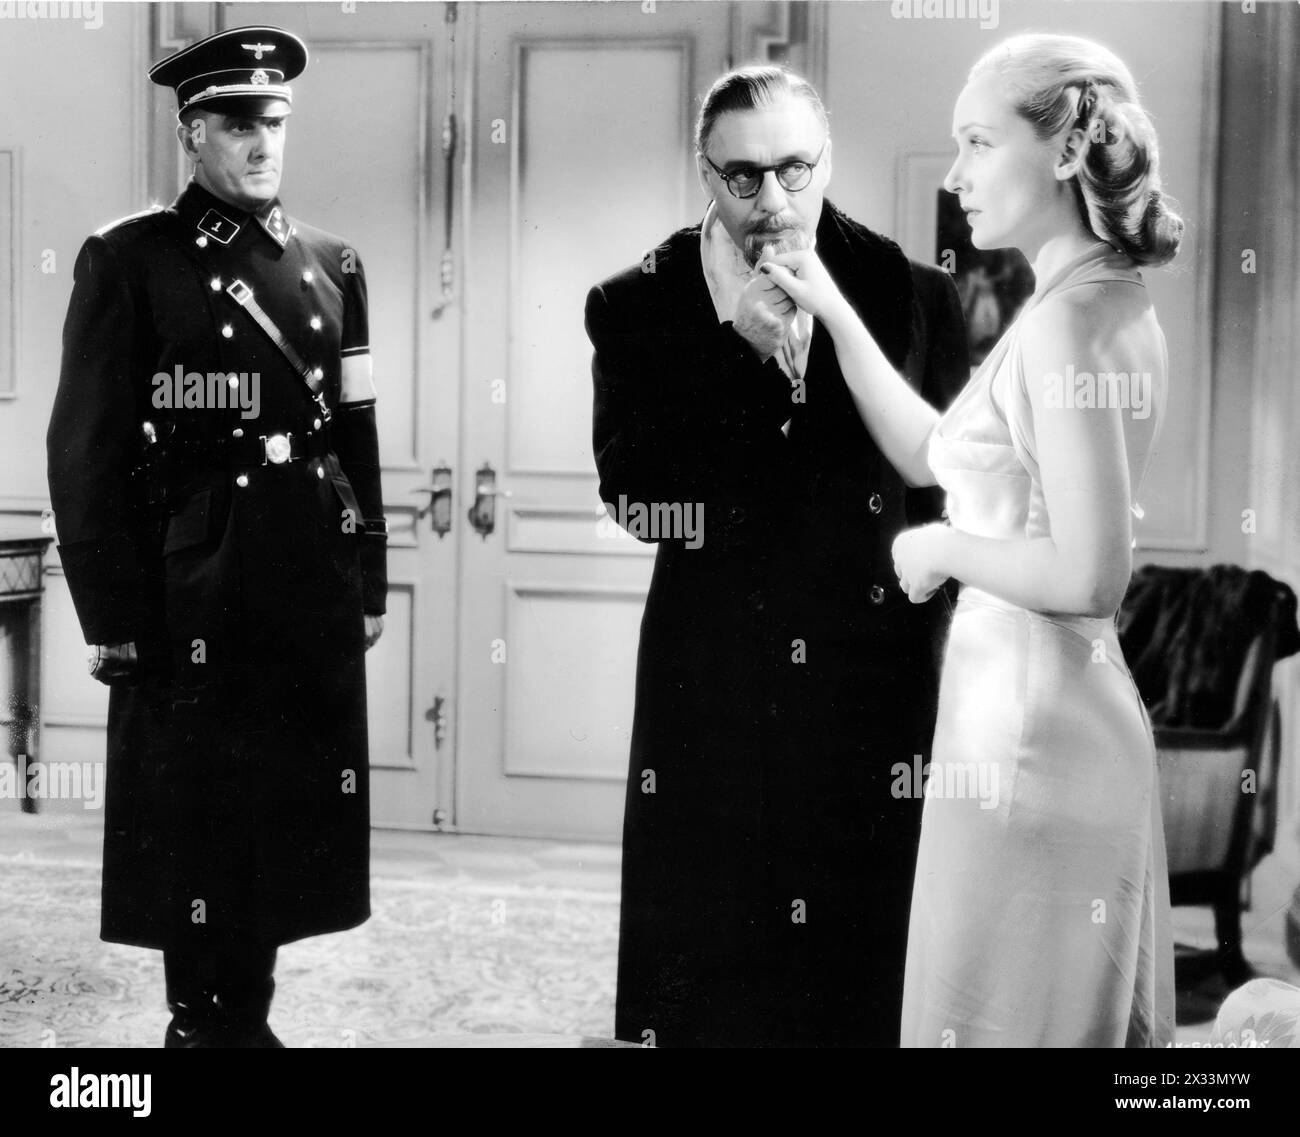 HENRY VICTOR as Captain Schultz with JACK BENNY and CAROLE LOMBARD in a scene from TO BE OR NOT TO BE 1942 Produced and Directed by ERNST LUBITSCH Story MELCHIOR LENGYEL Screenplay EDWIN JUSTUS MEYER Costume Design IRENE  (for Carole Lombard) Cinematographer RUDOLPH MATE Production Design VINCENT KORDA  Music WERNER R HEYMANN  Photograph by COBURN  Presented by ALEXANDER KORDA  United Artists Stock Photo